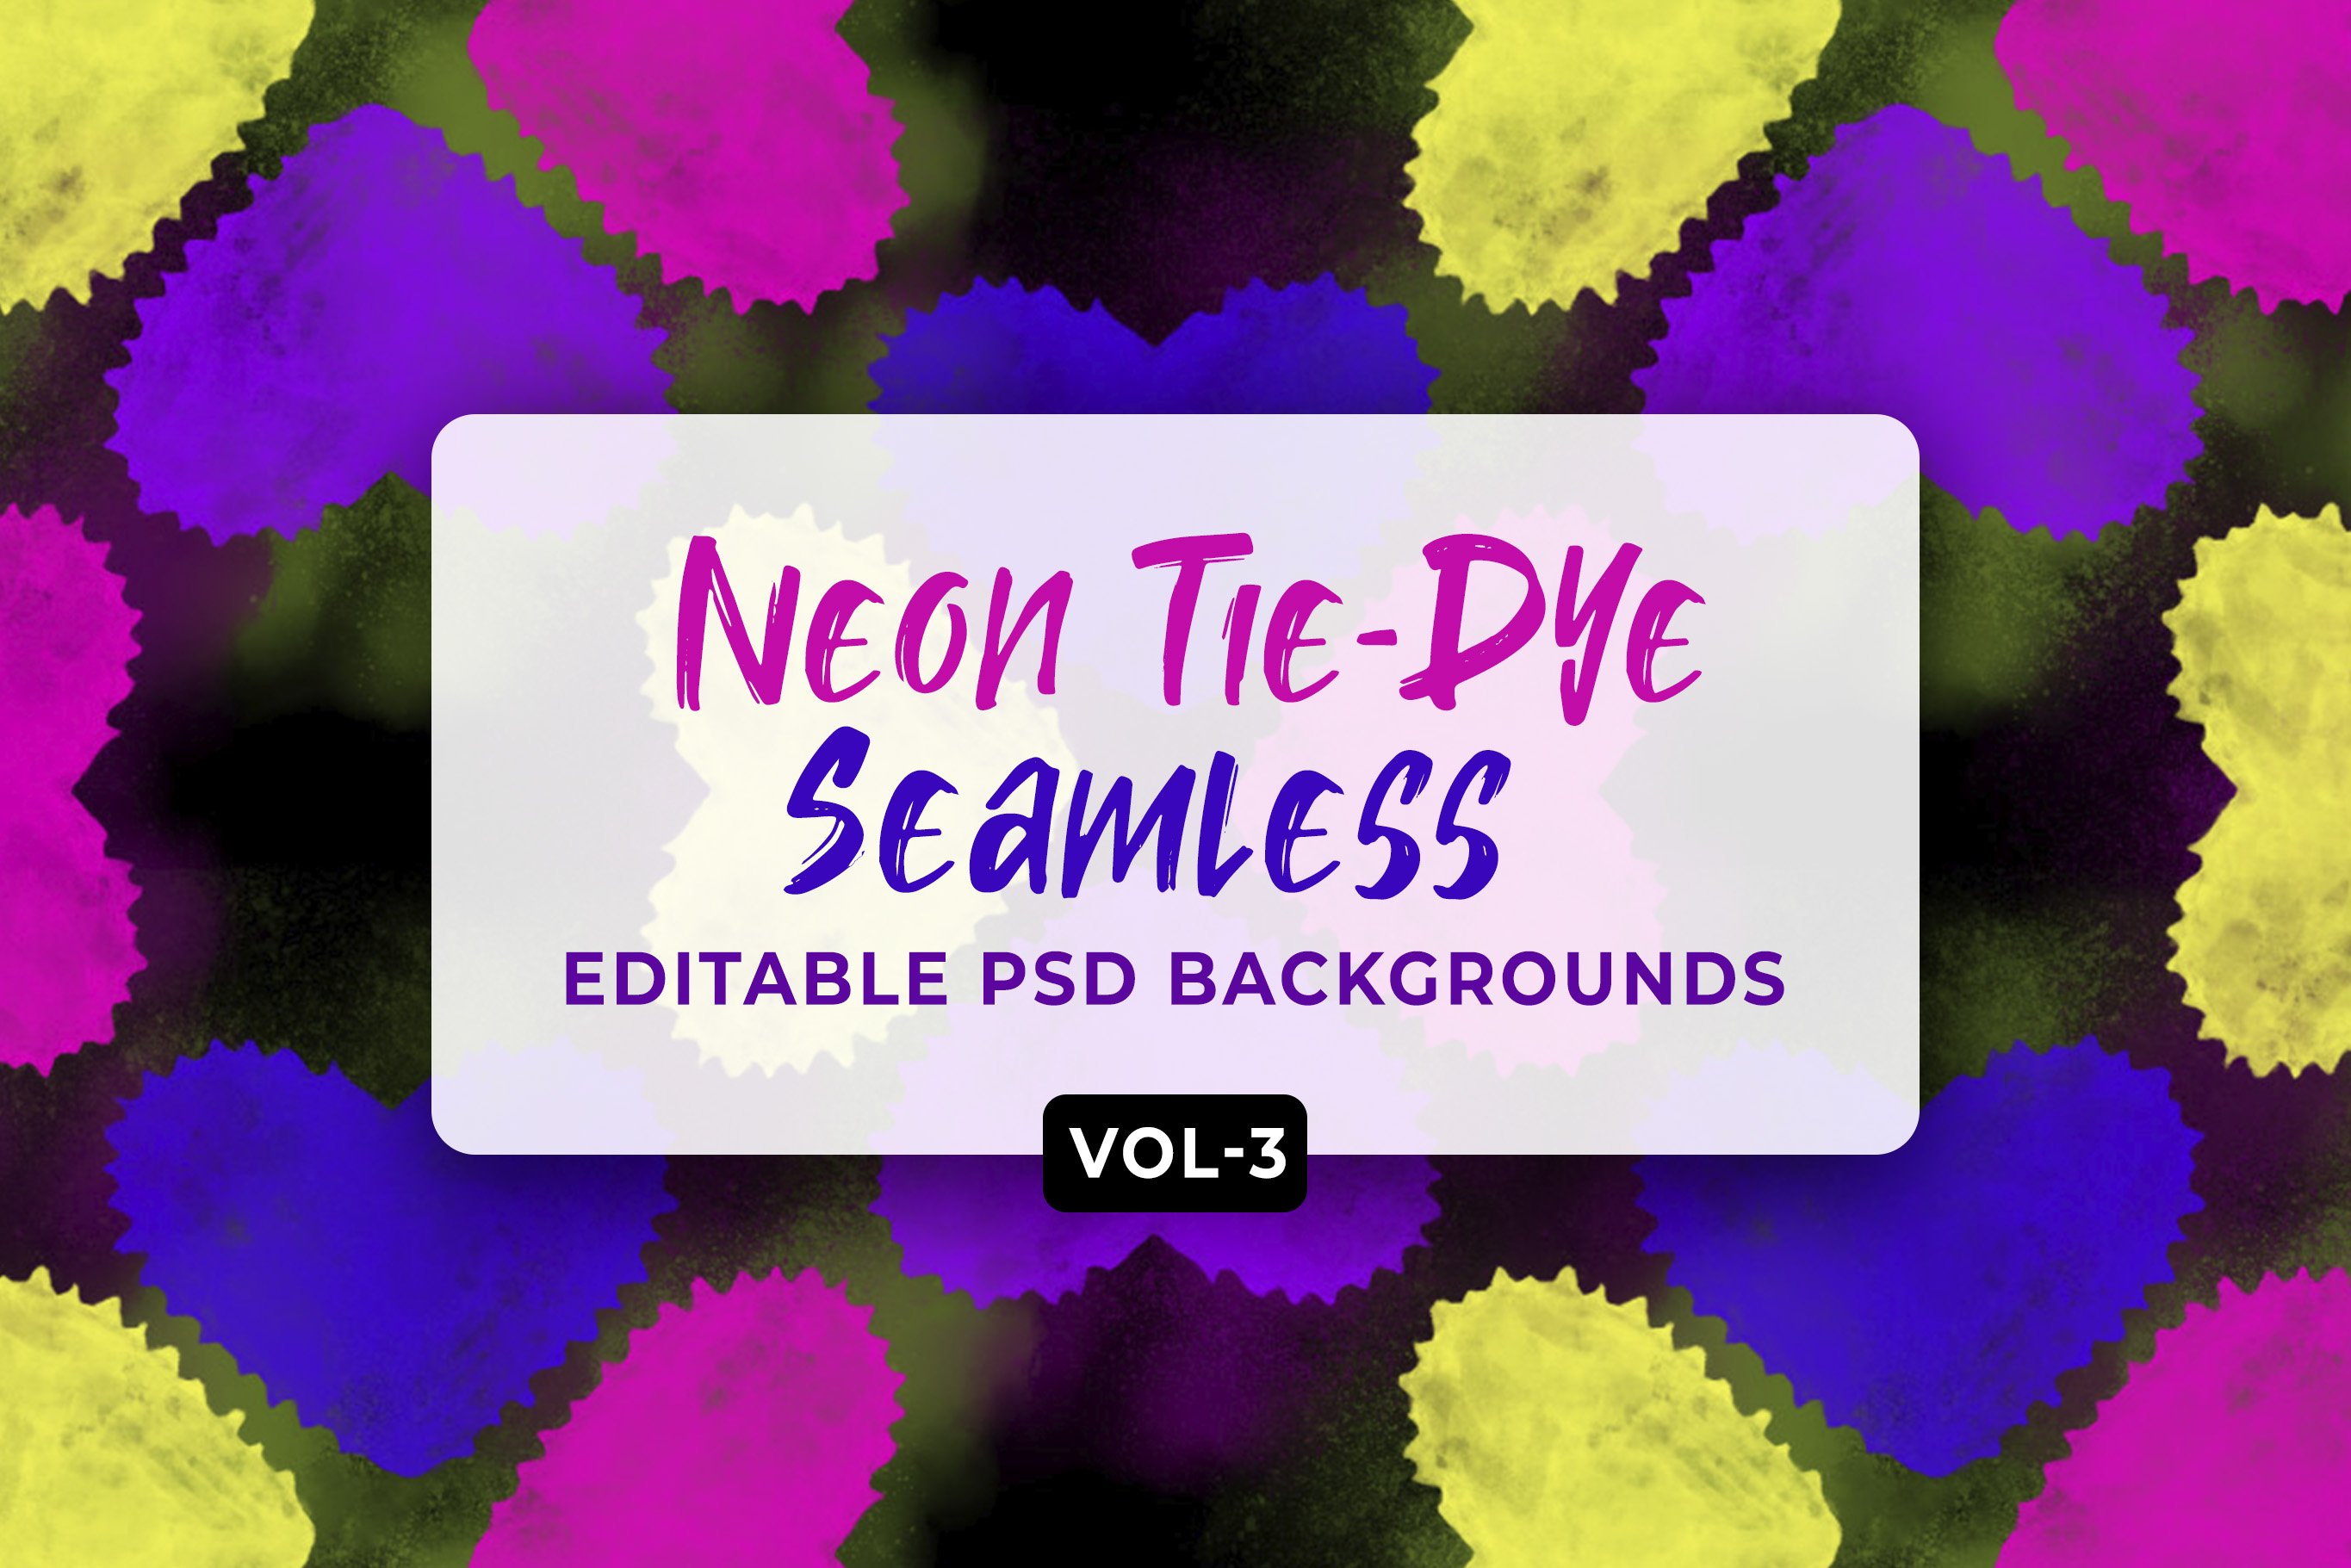 Neon Tie-Dye Seamless Patterns V-03 cover image.